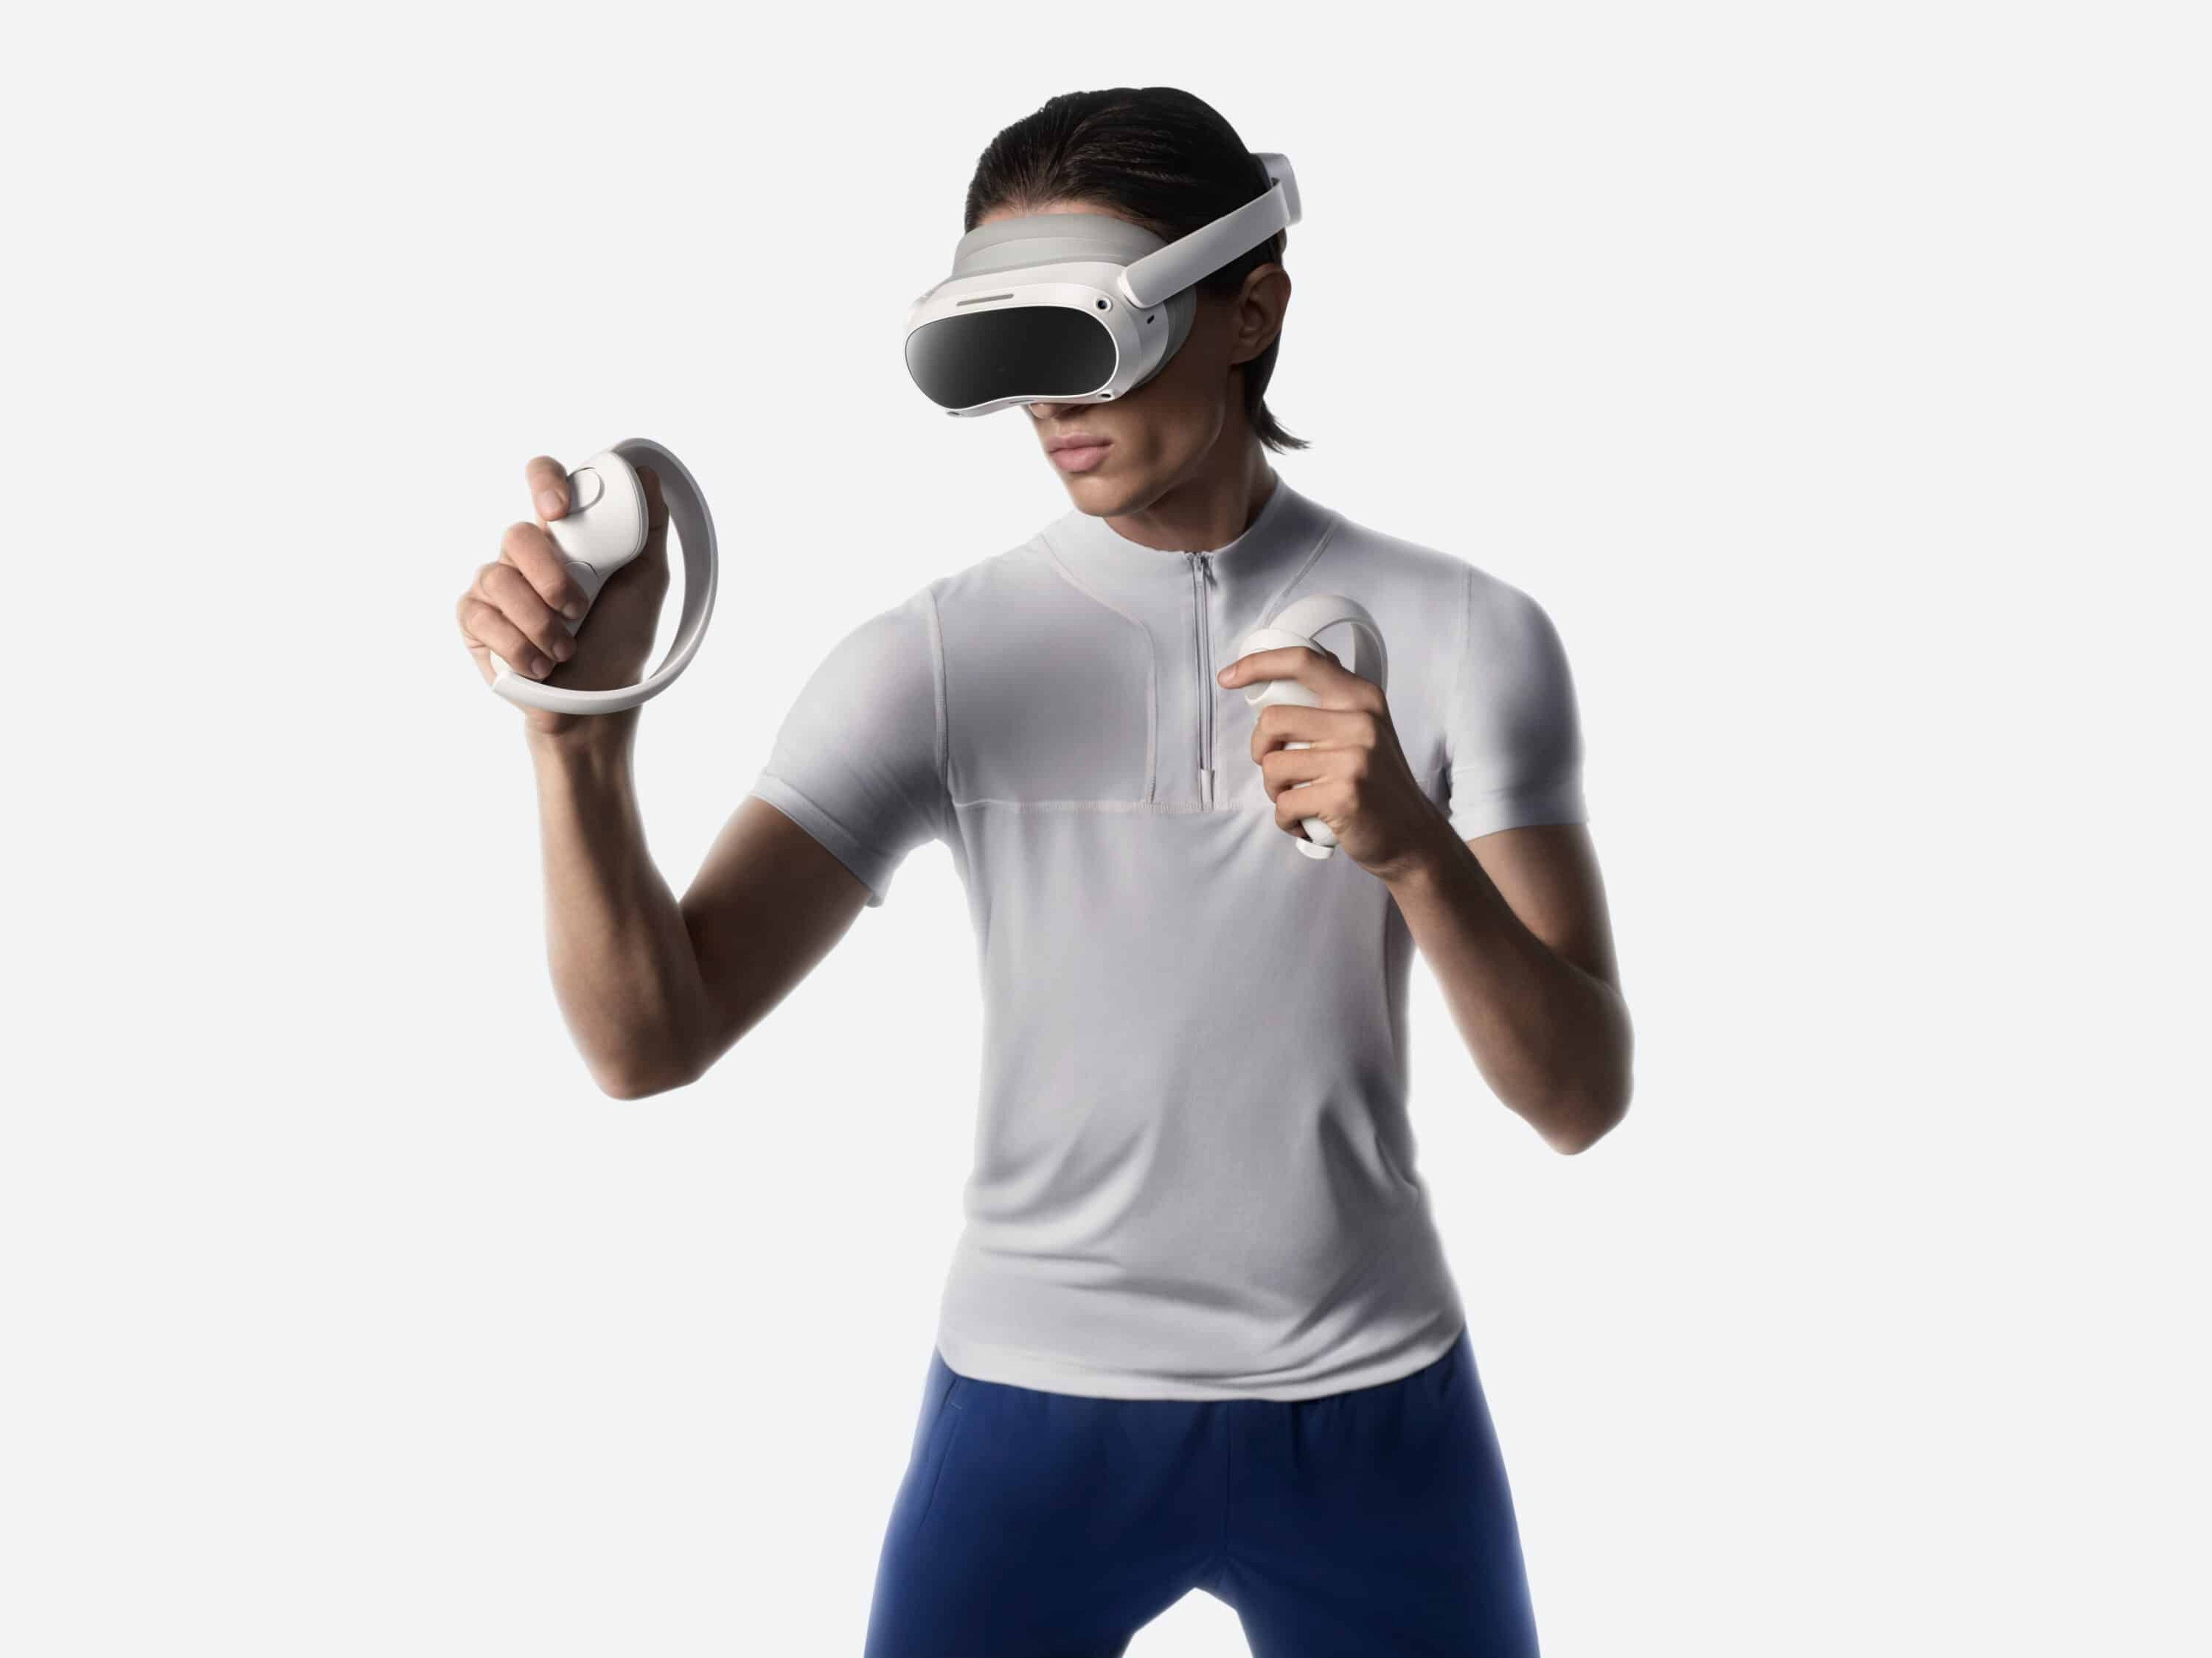 ByteDance’s Pico 4 VR headset is China’s answer to Meta’s Quest 2, as both sport the same processor. But the Pico offers slightly better specs for a lower price. Photo: Handout